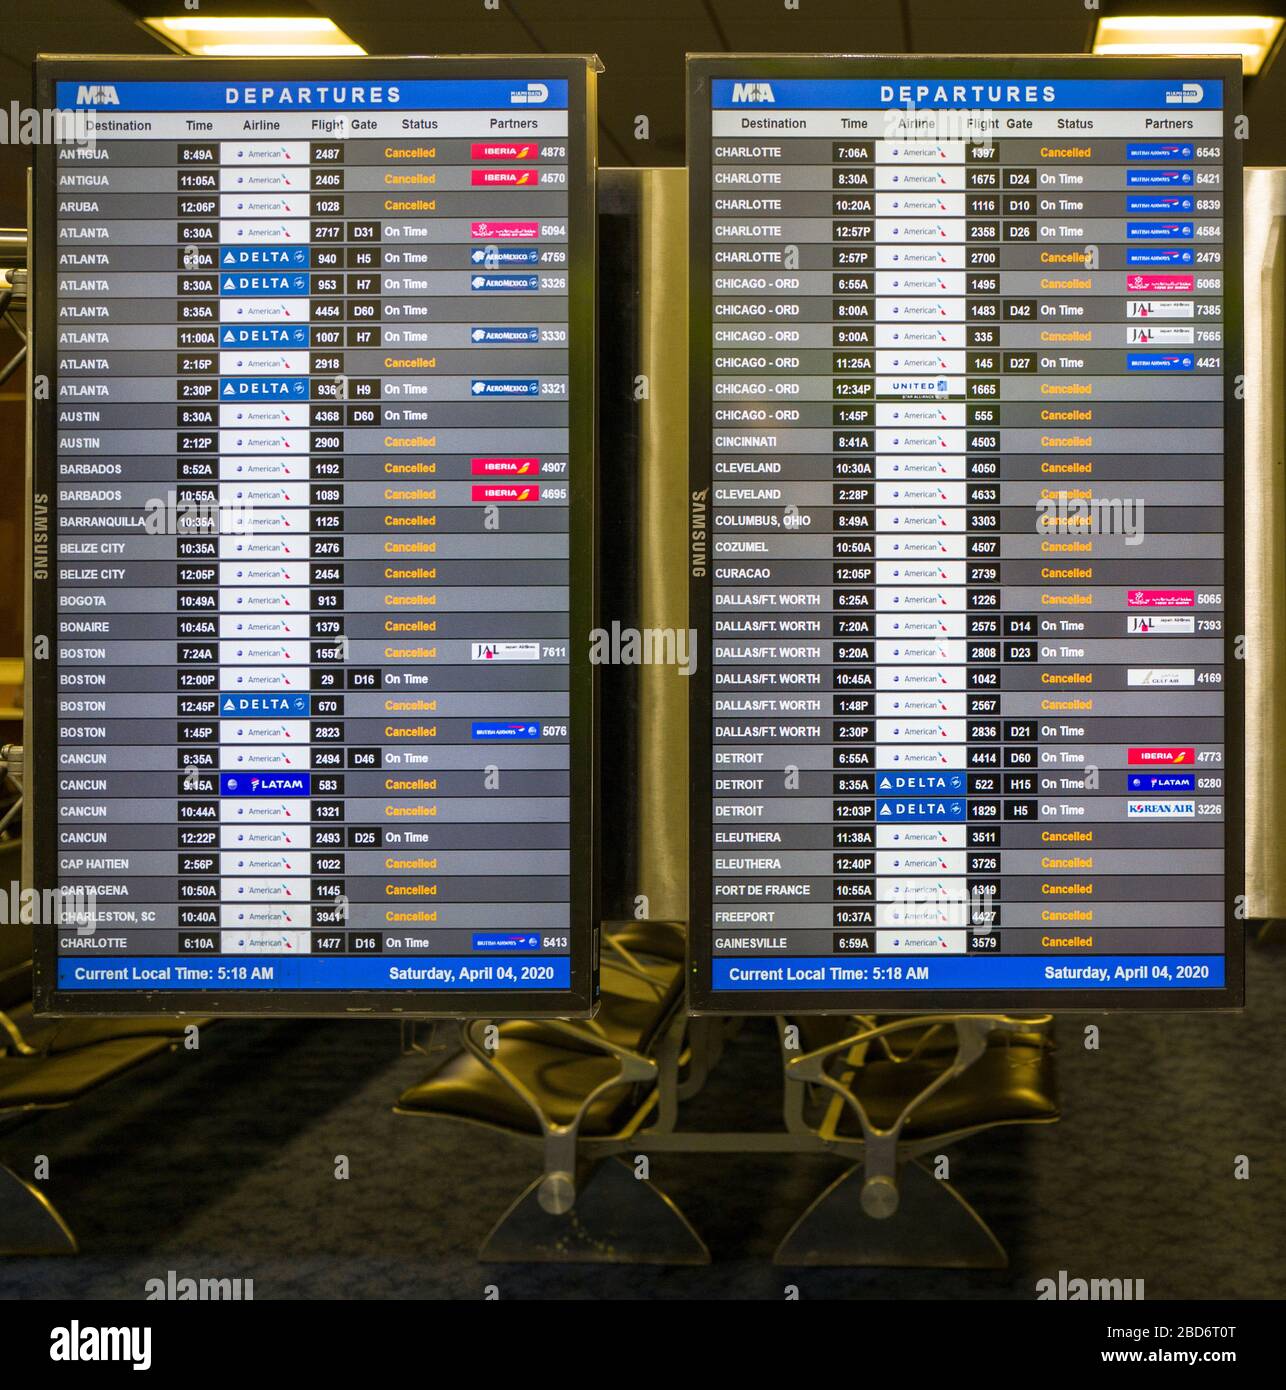 Flight Schedule Display at the Miami International Airport showing the majority of the Flights were cancel during the Coronavirus COVID-19 Pandemic. Stock Photo